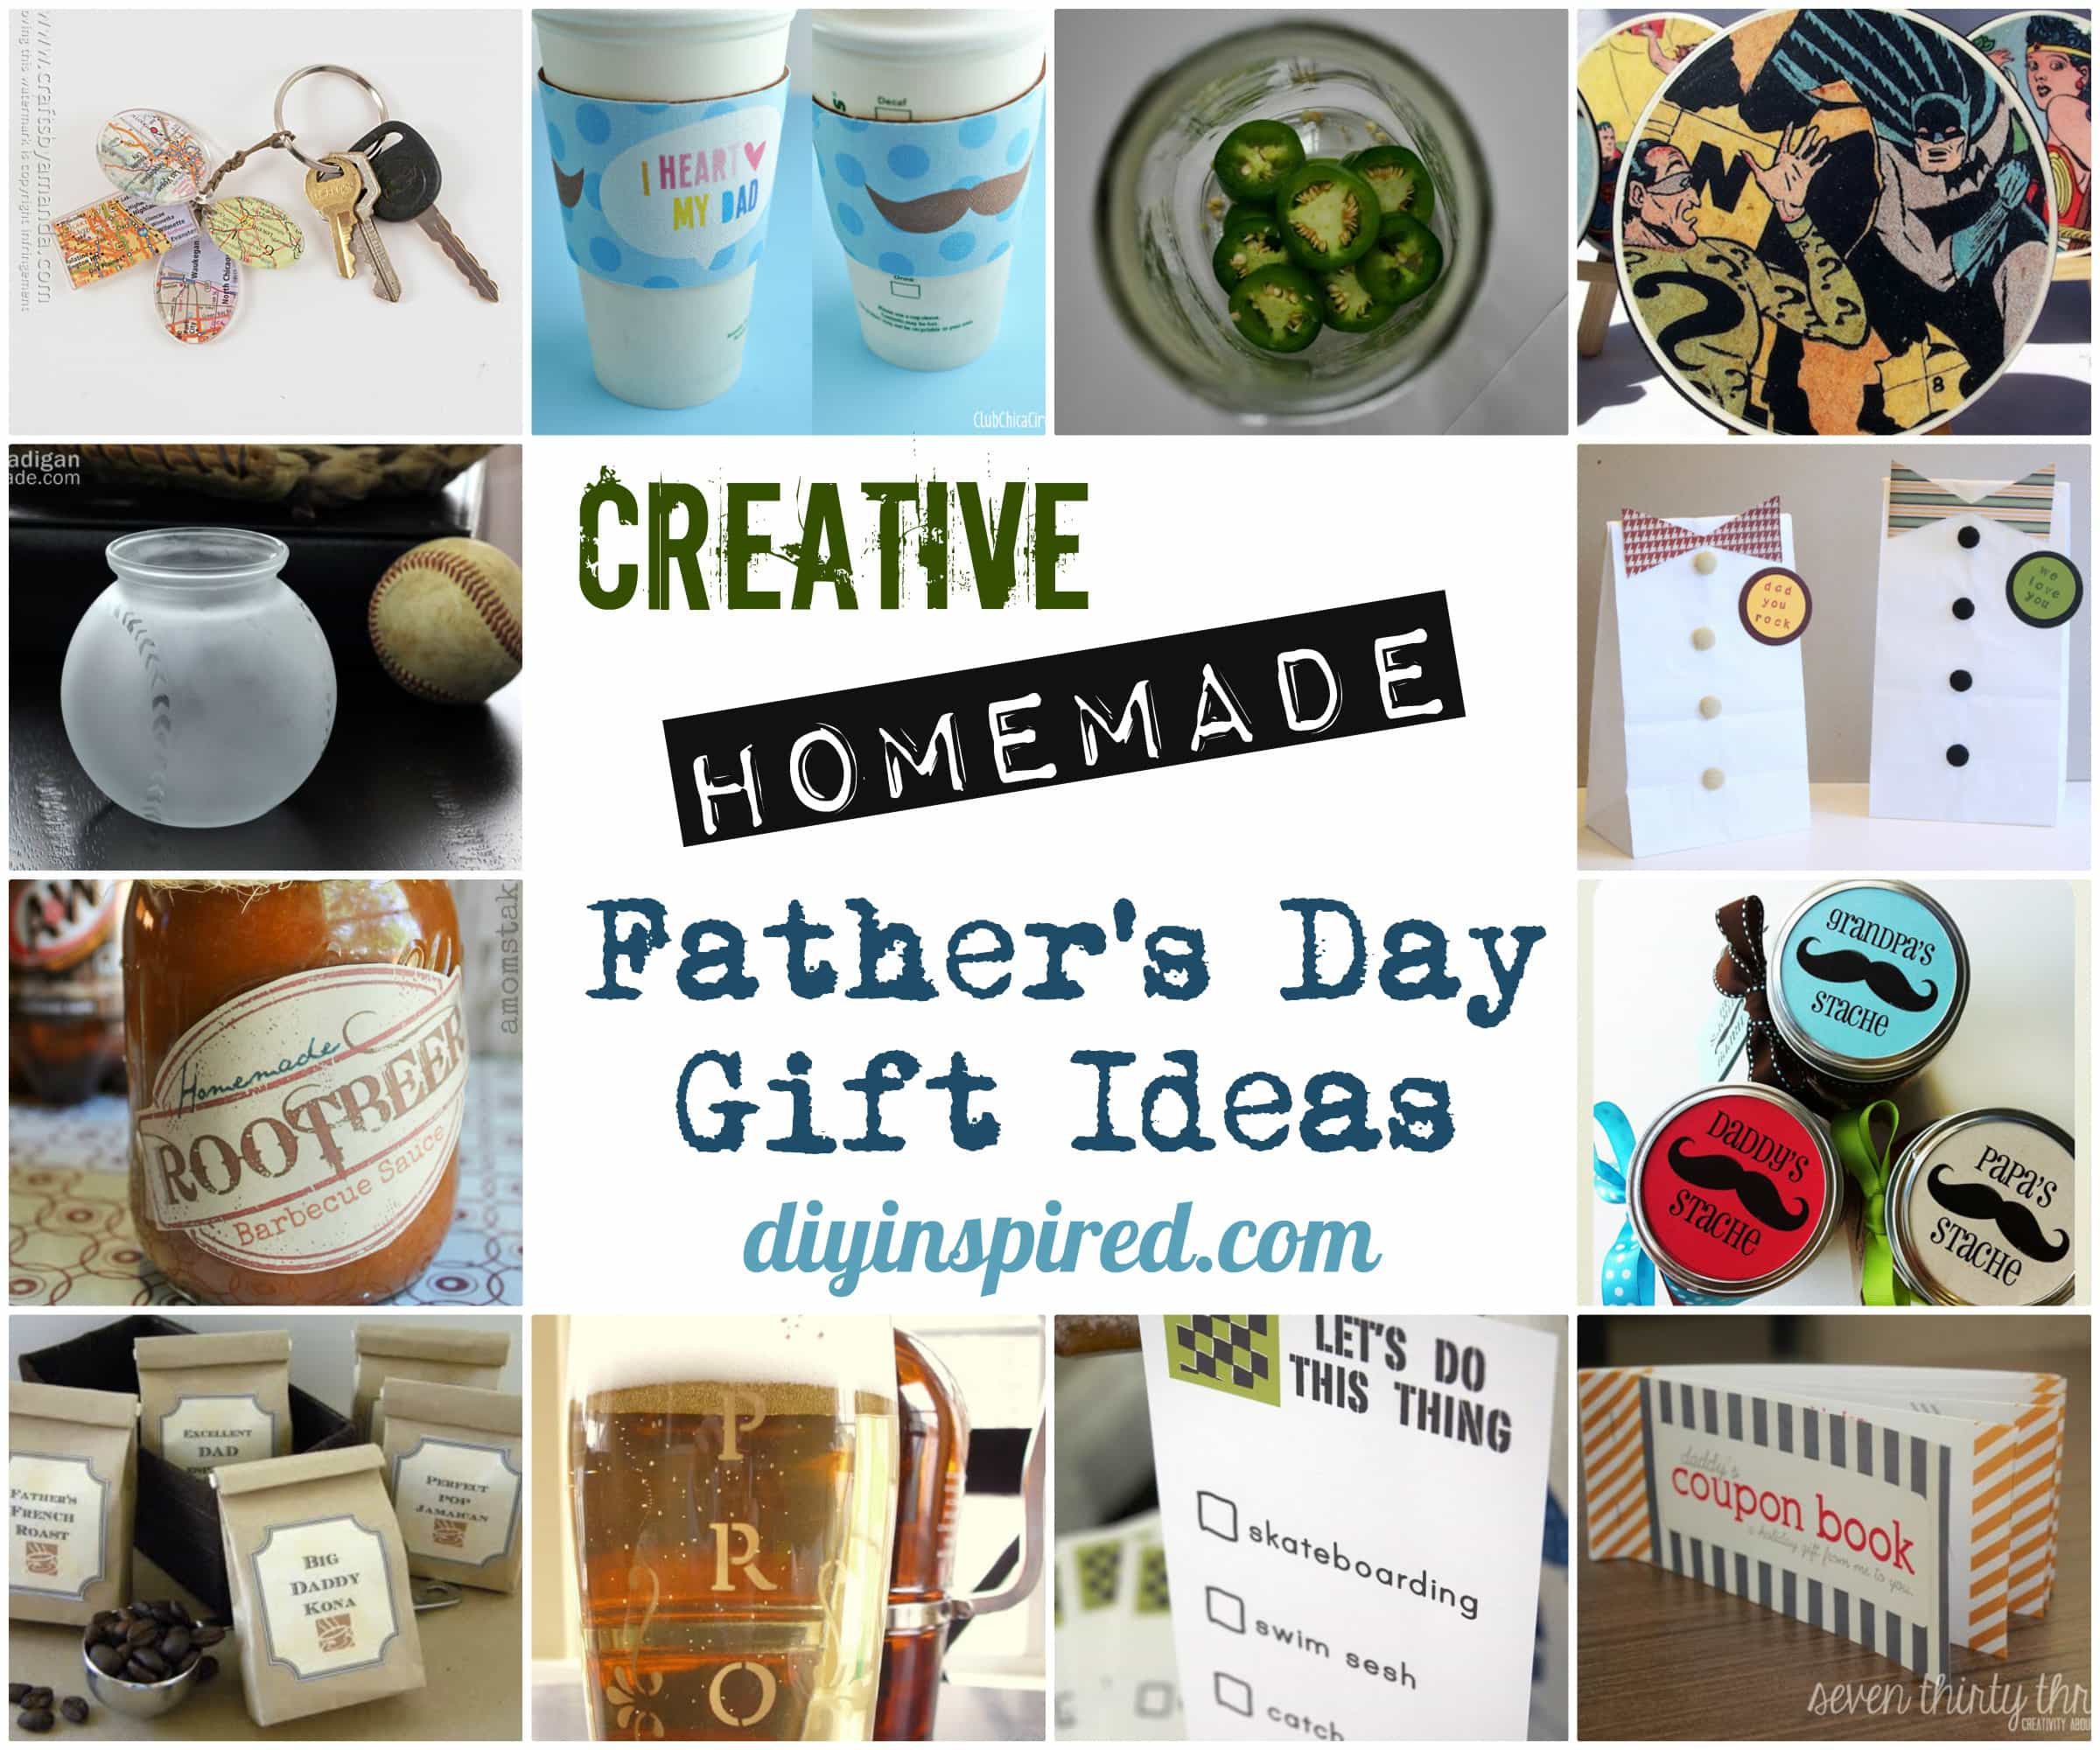 Homemade Gift Ideas For Father'S Day
 Creative Homemade Father’s Day Gift Ideas DIY Inspired